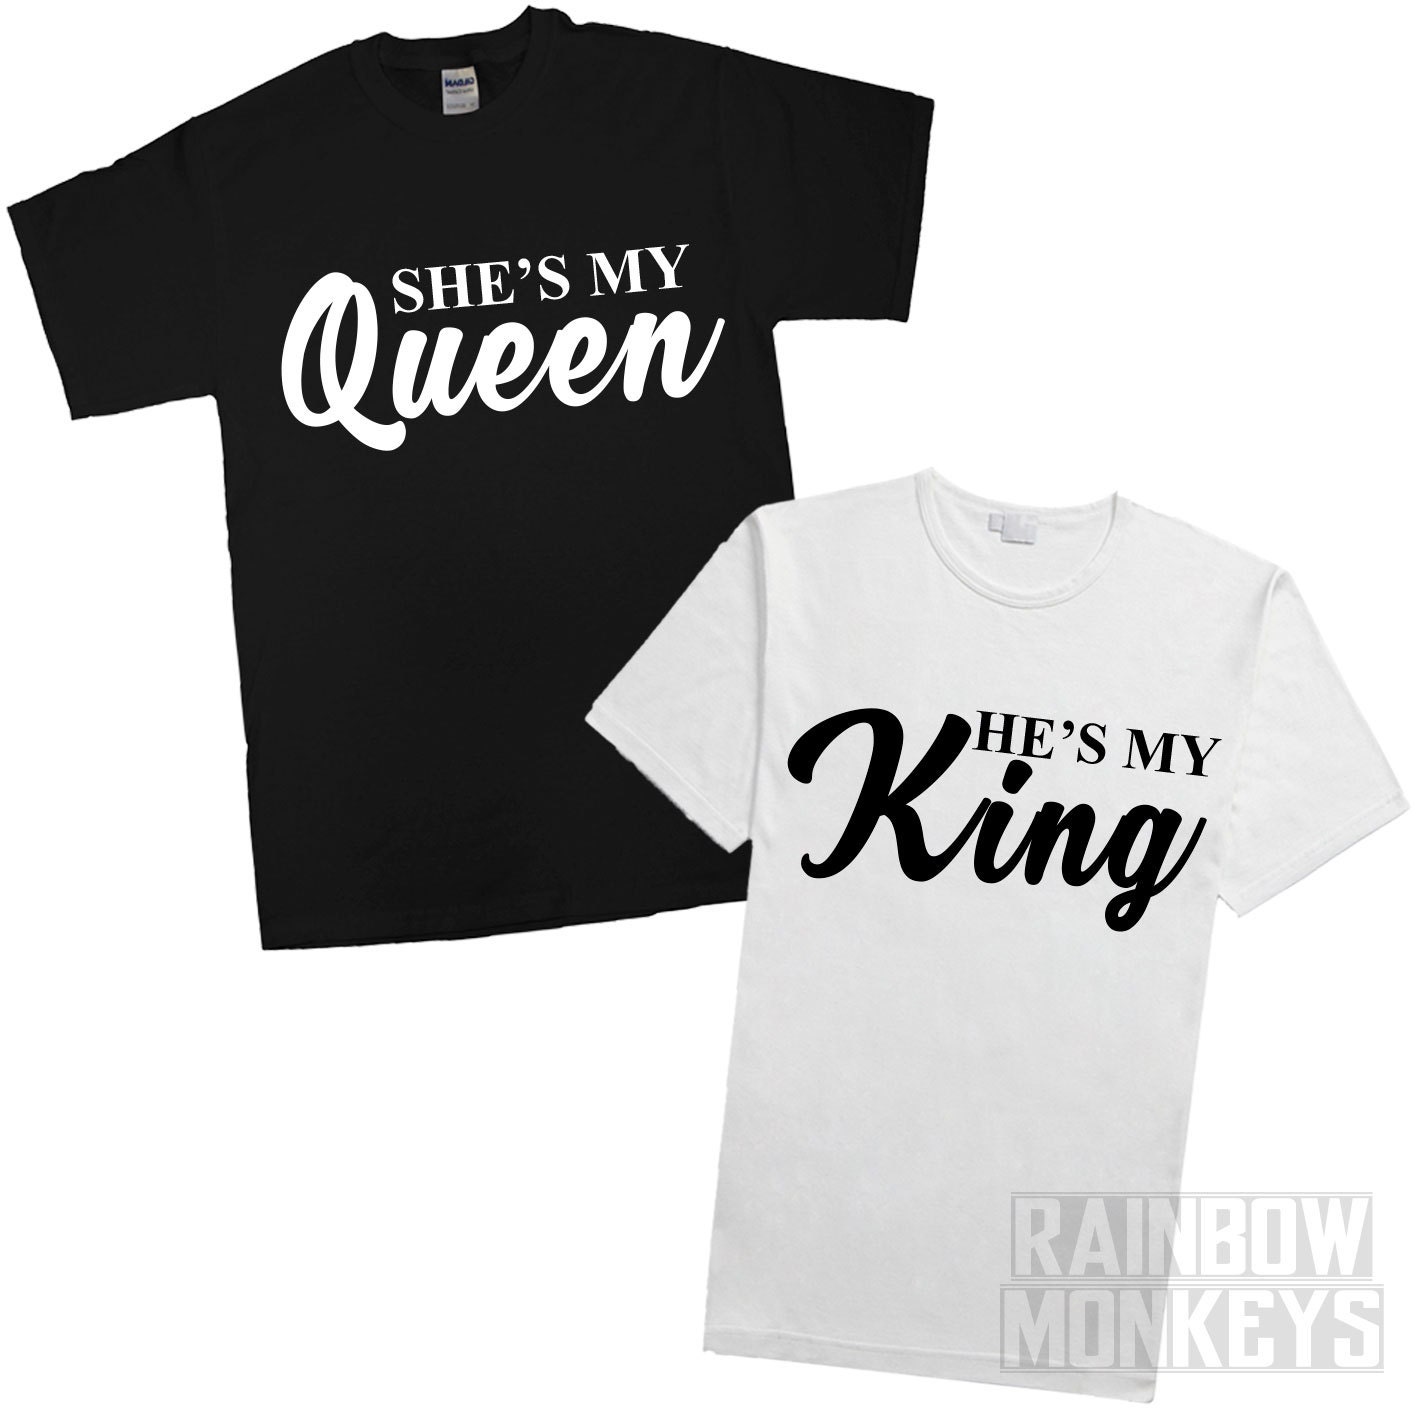 King Queen Shirts He's My King and She's My Queen by RMonkeys